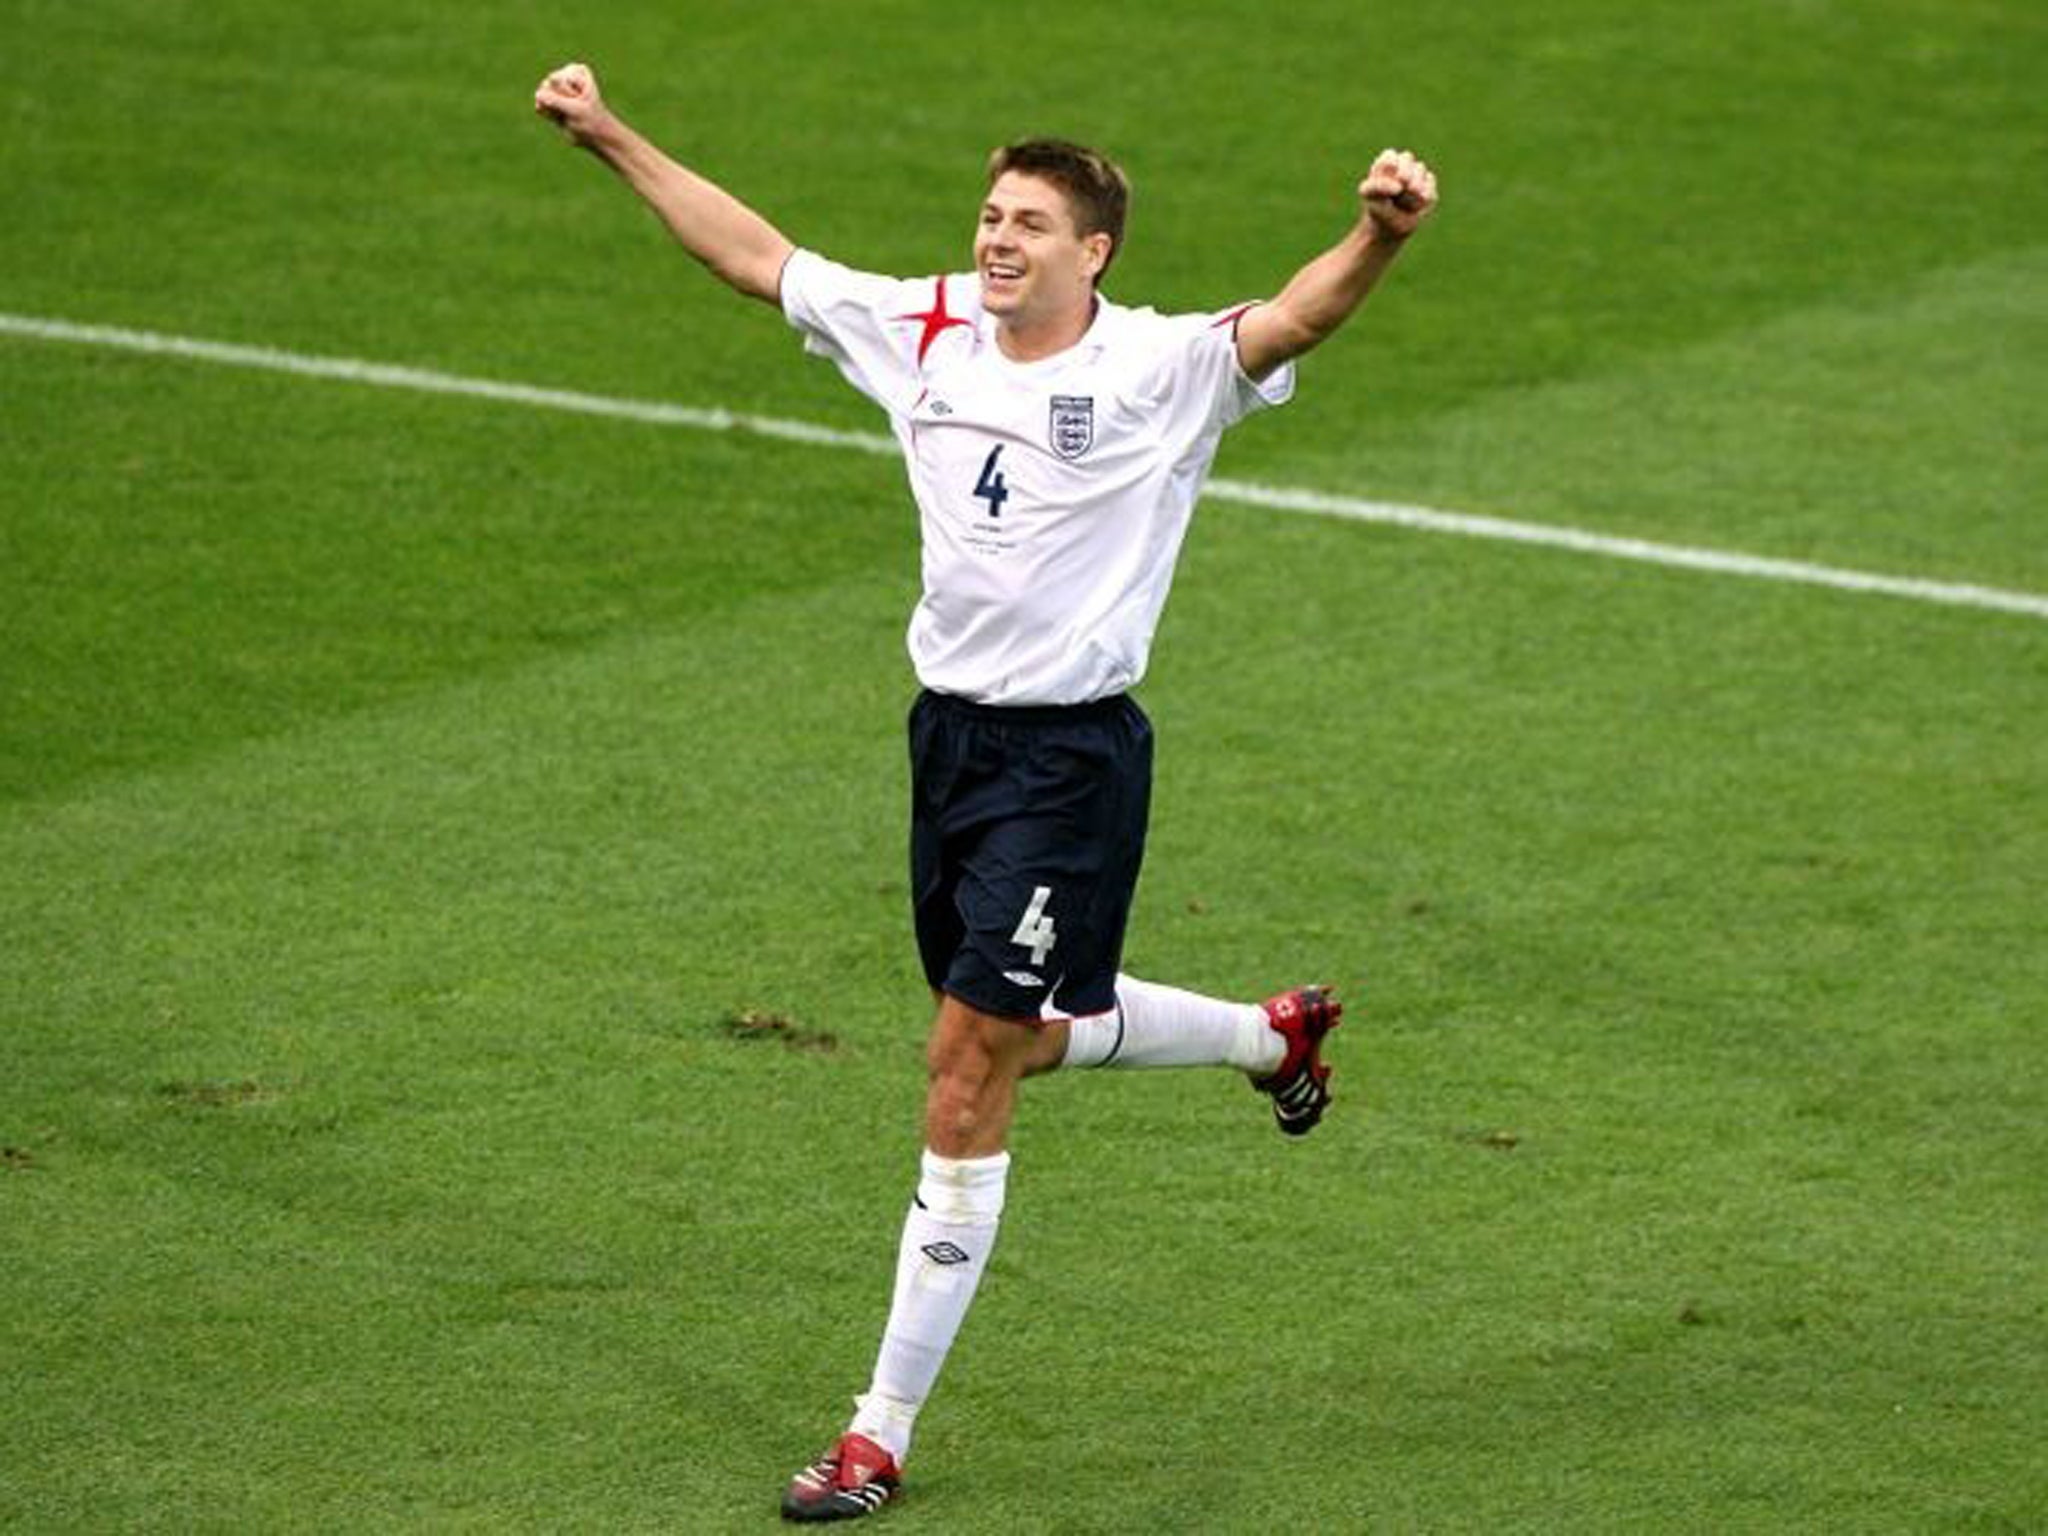 Gerrard is set to become only the sixth player to reach 100 caps for the national team